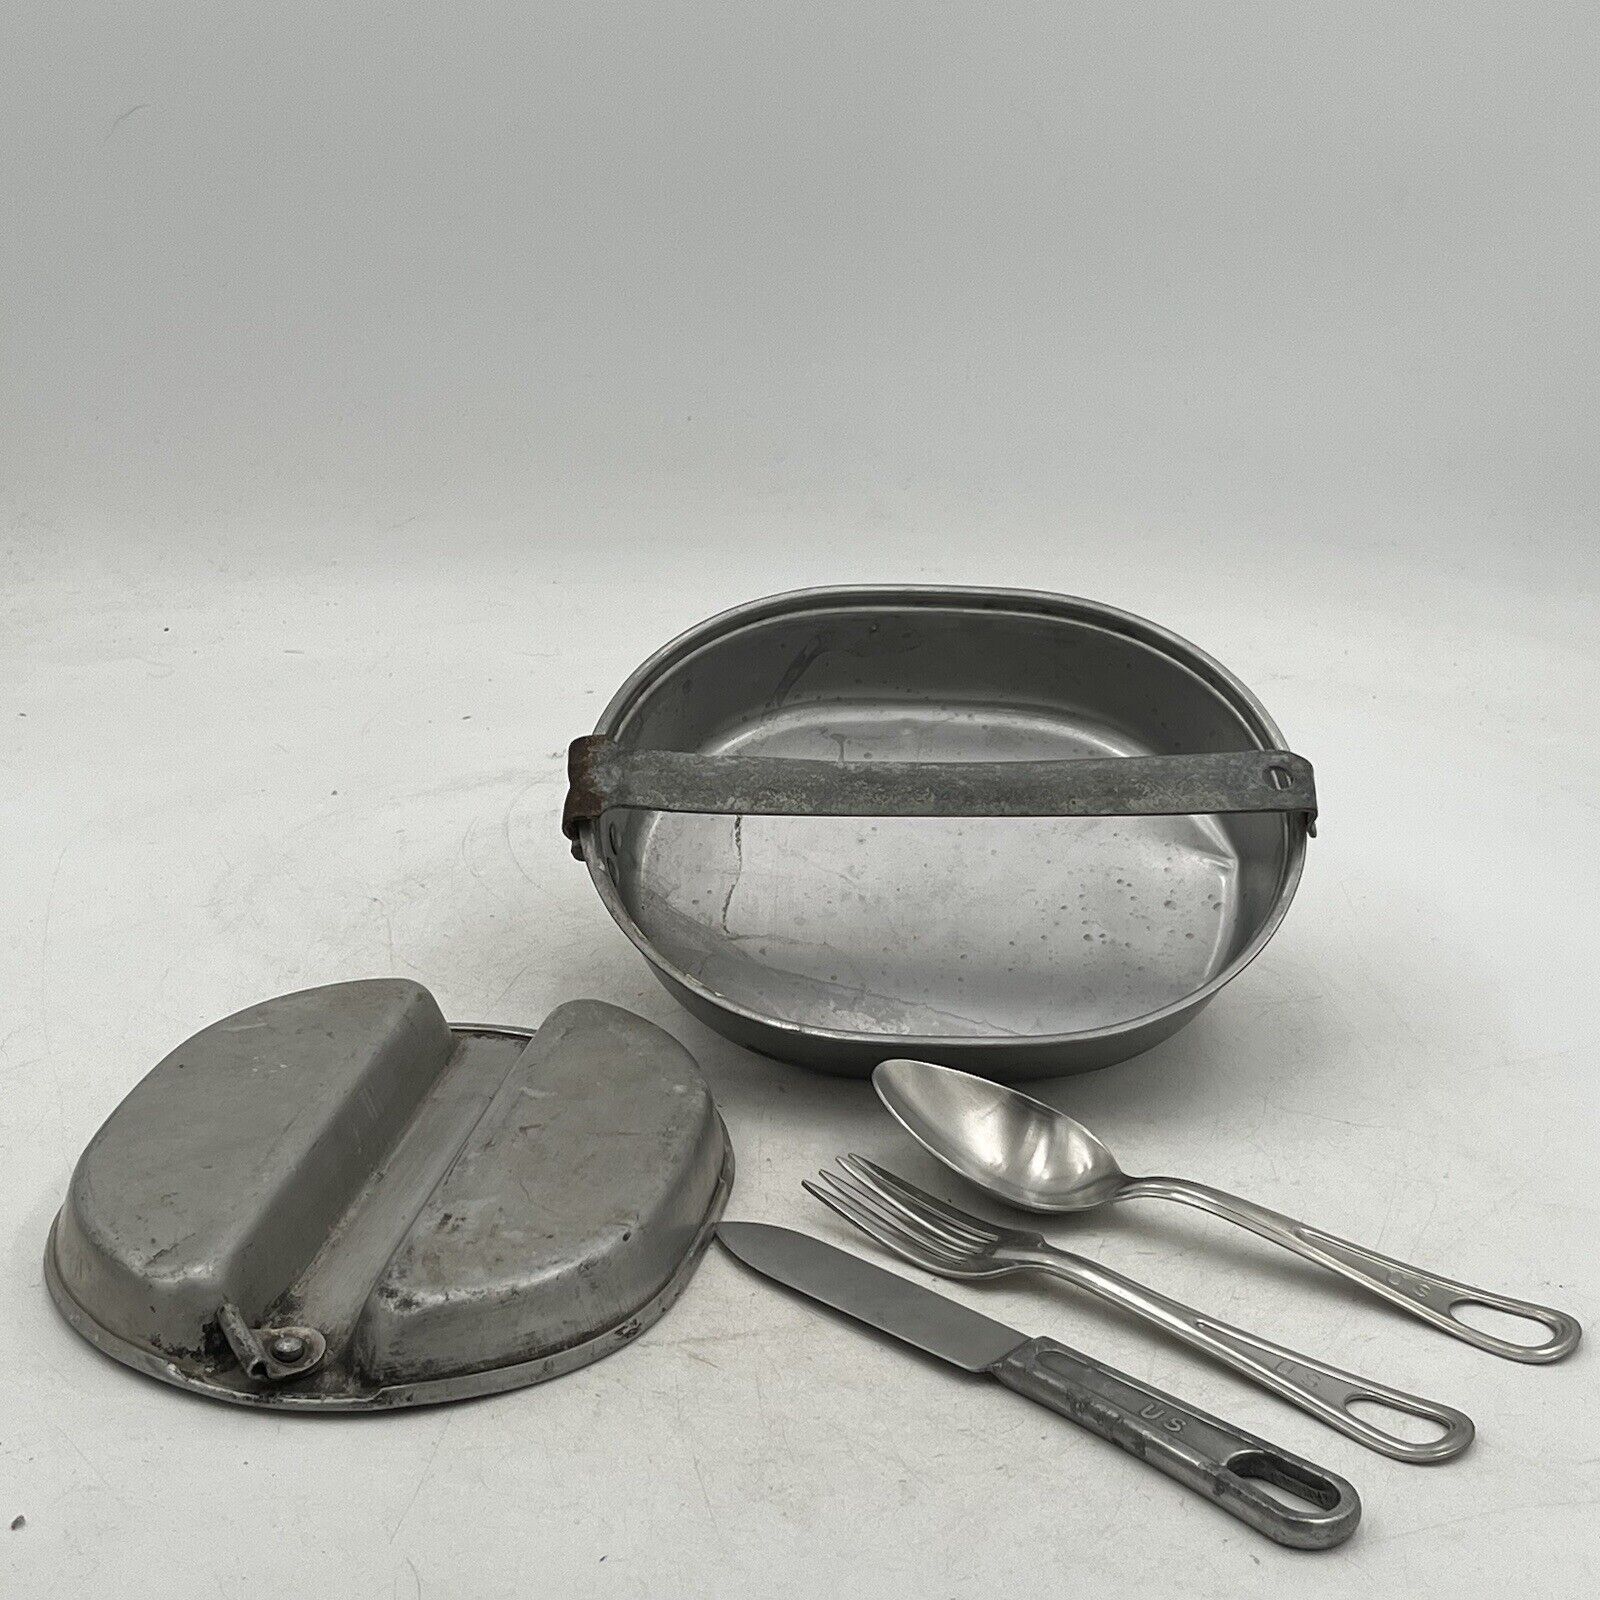 Original WW2 US Military Mess Kit 1944 Complete Utensils-Fork knife spoon WWII